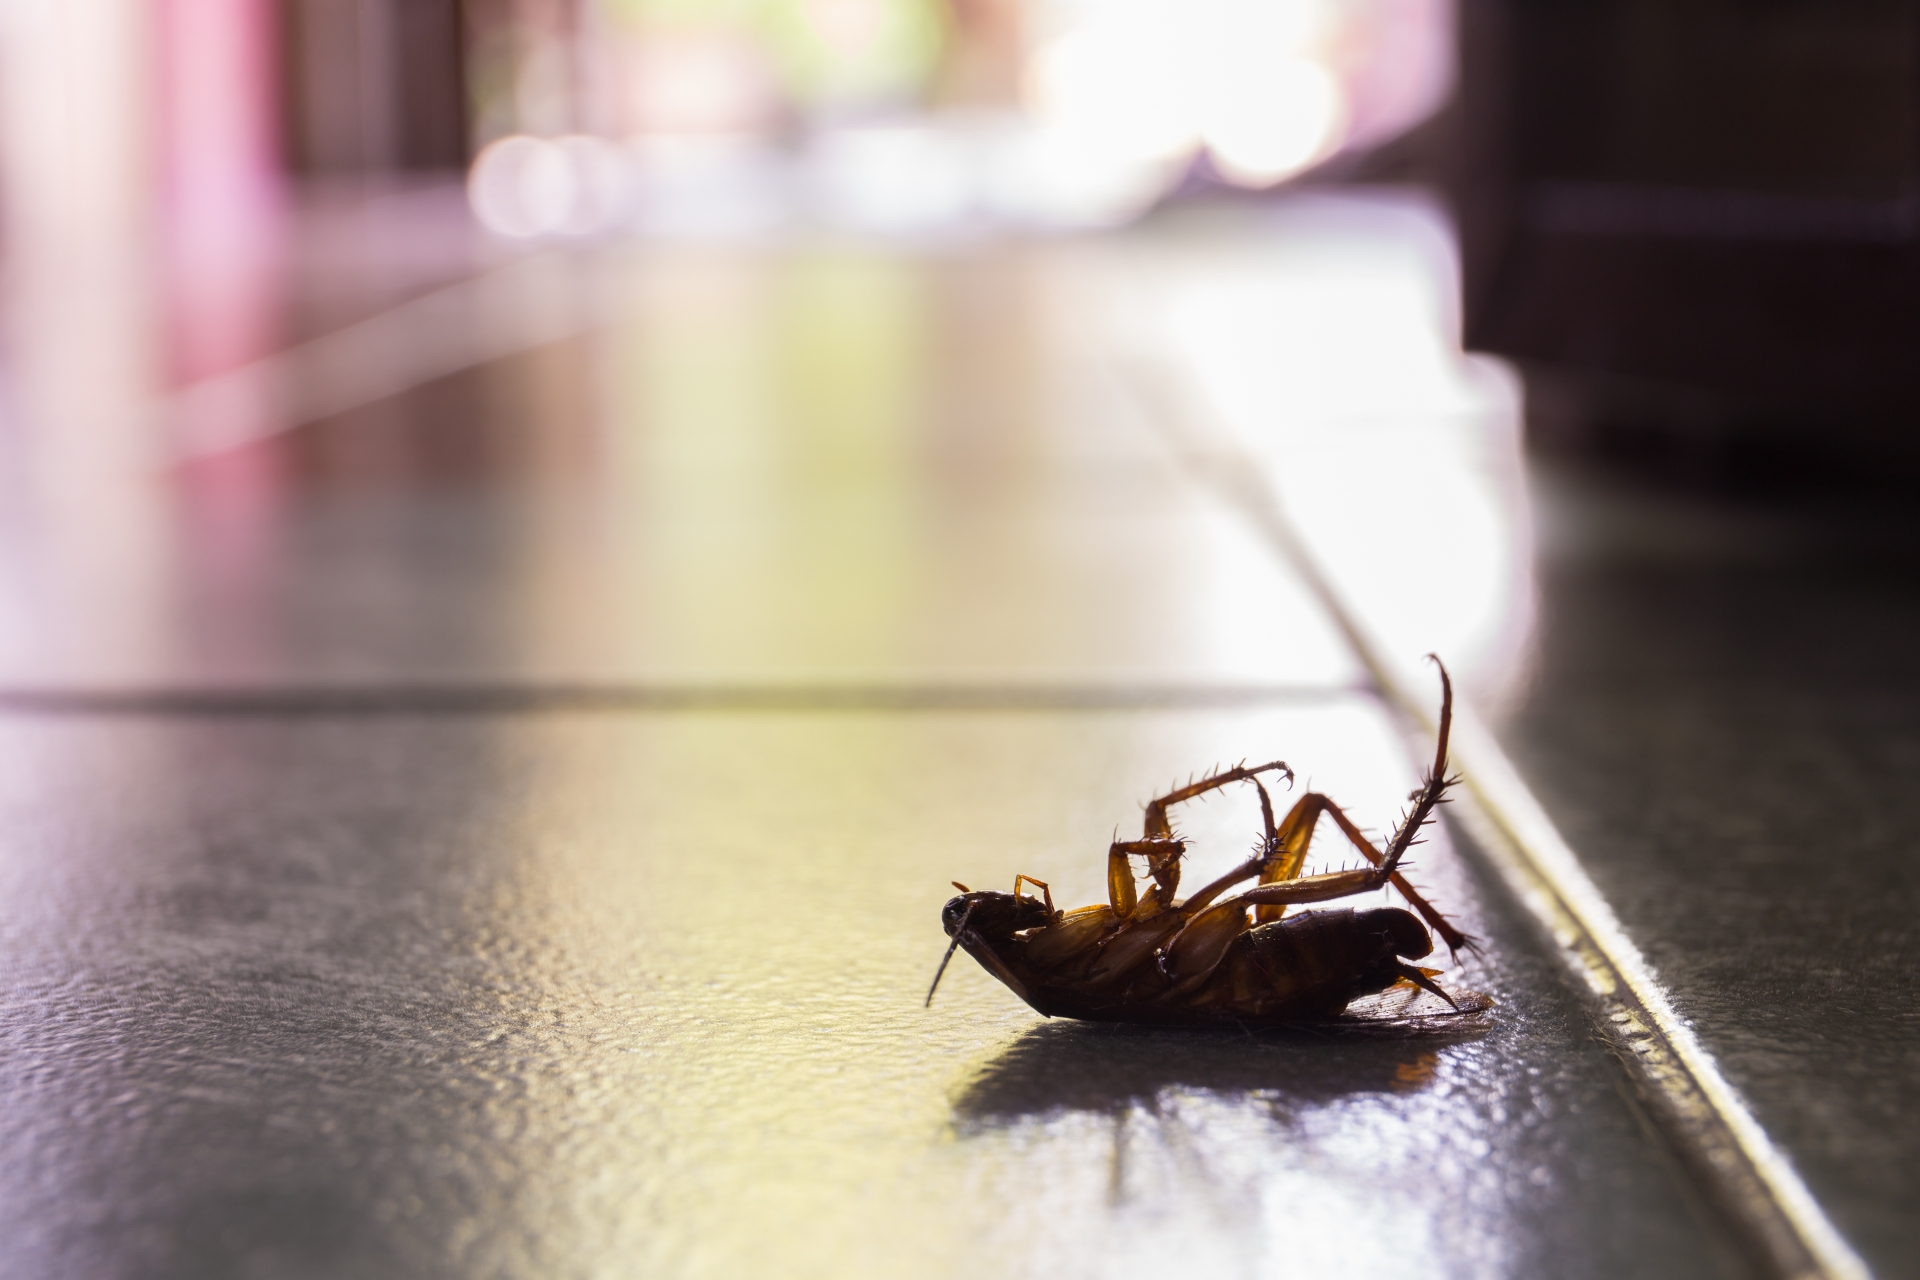 Cockroach Control, Pest Control in Bexley, DA5. Call Now 020 8166 9746